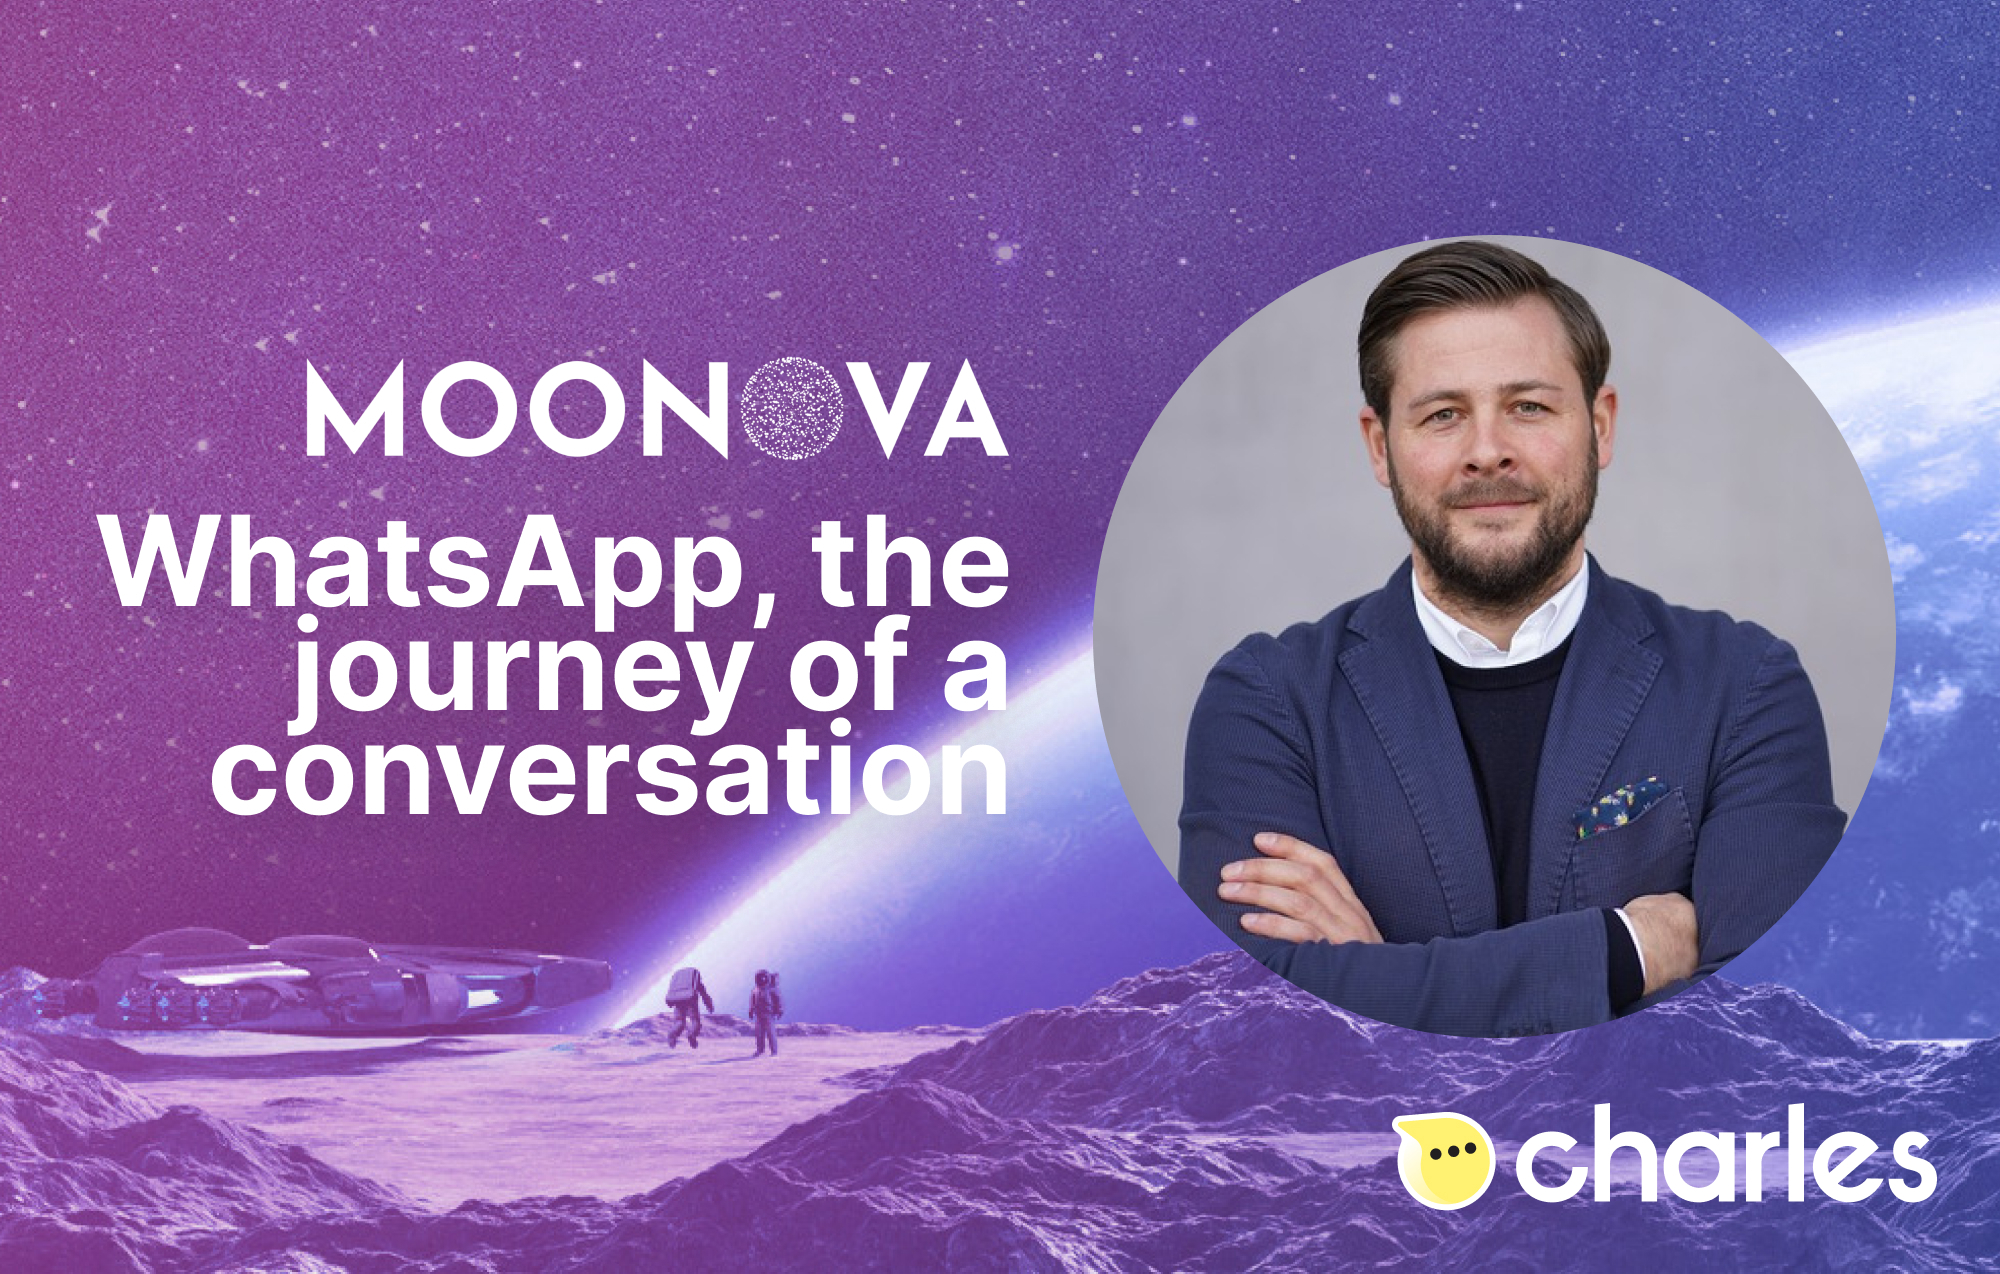 Moonova talk with charles, WhatsApp the journey of a conversation